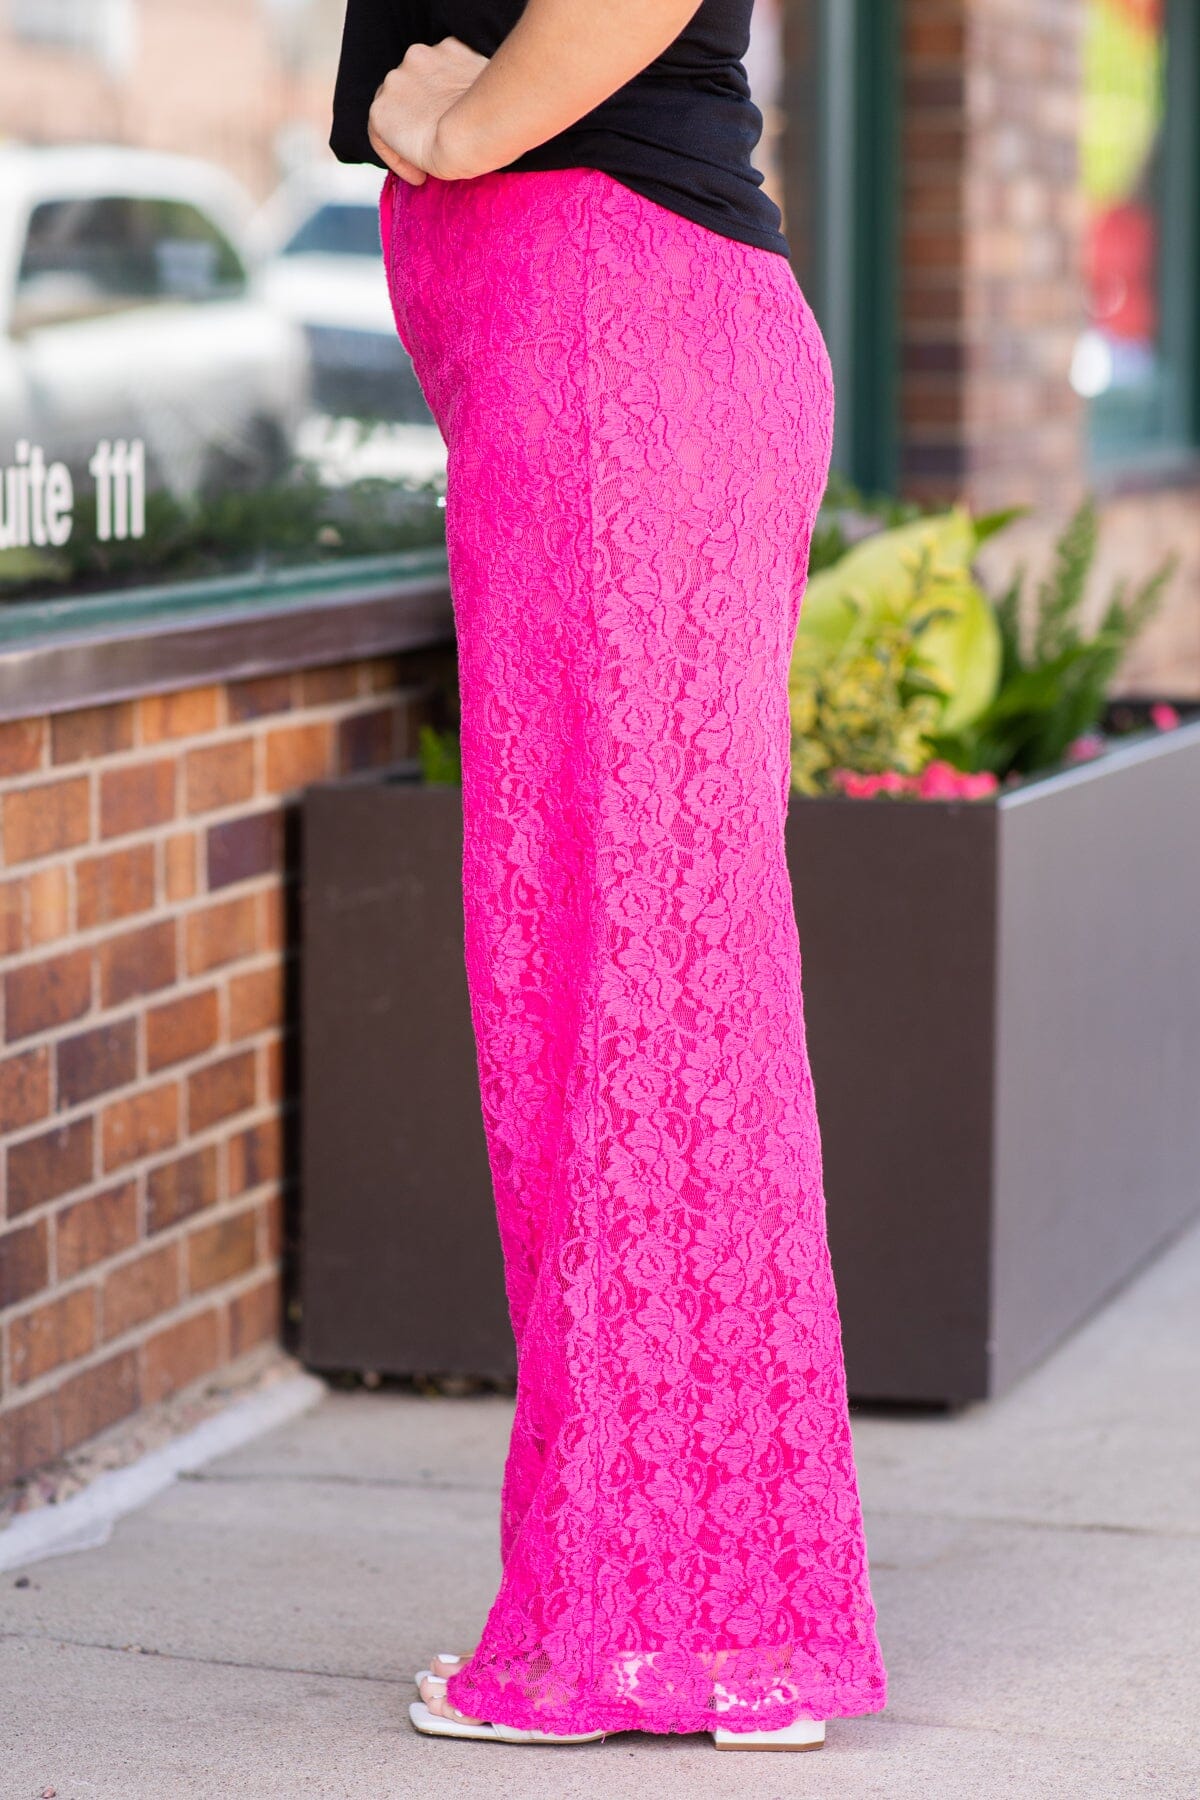 Hot Pink Lace Wide Leg Pants - Filly Flair